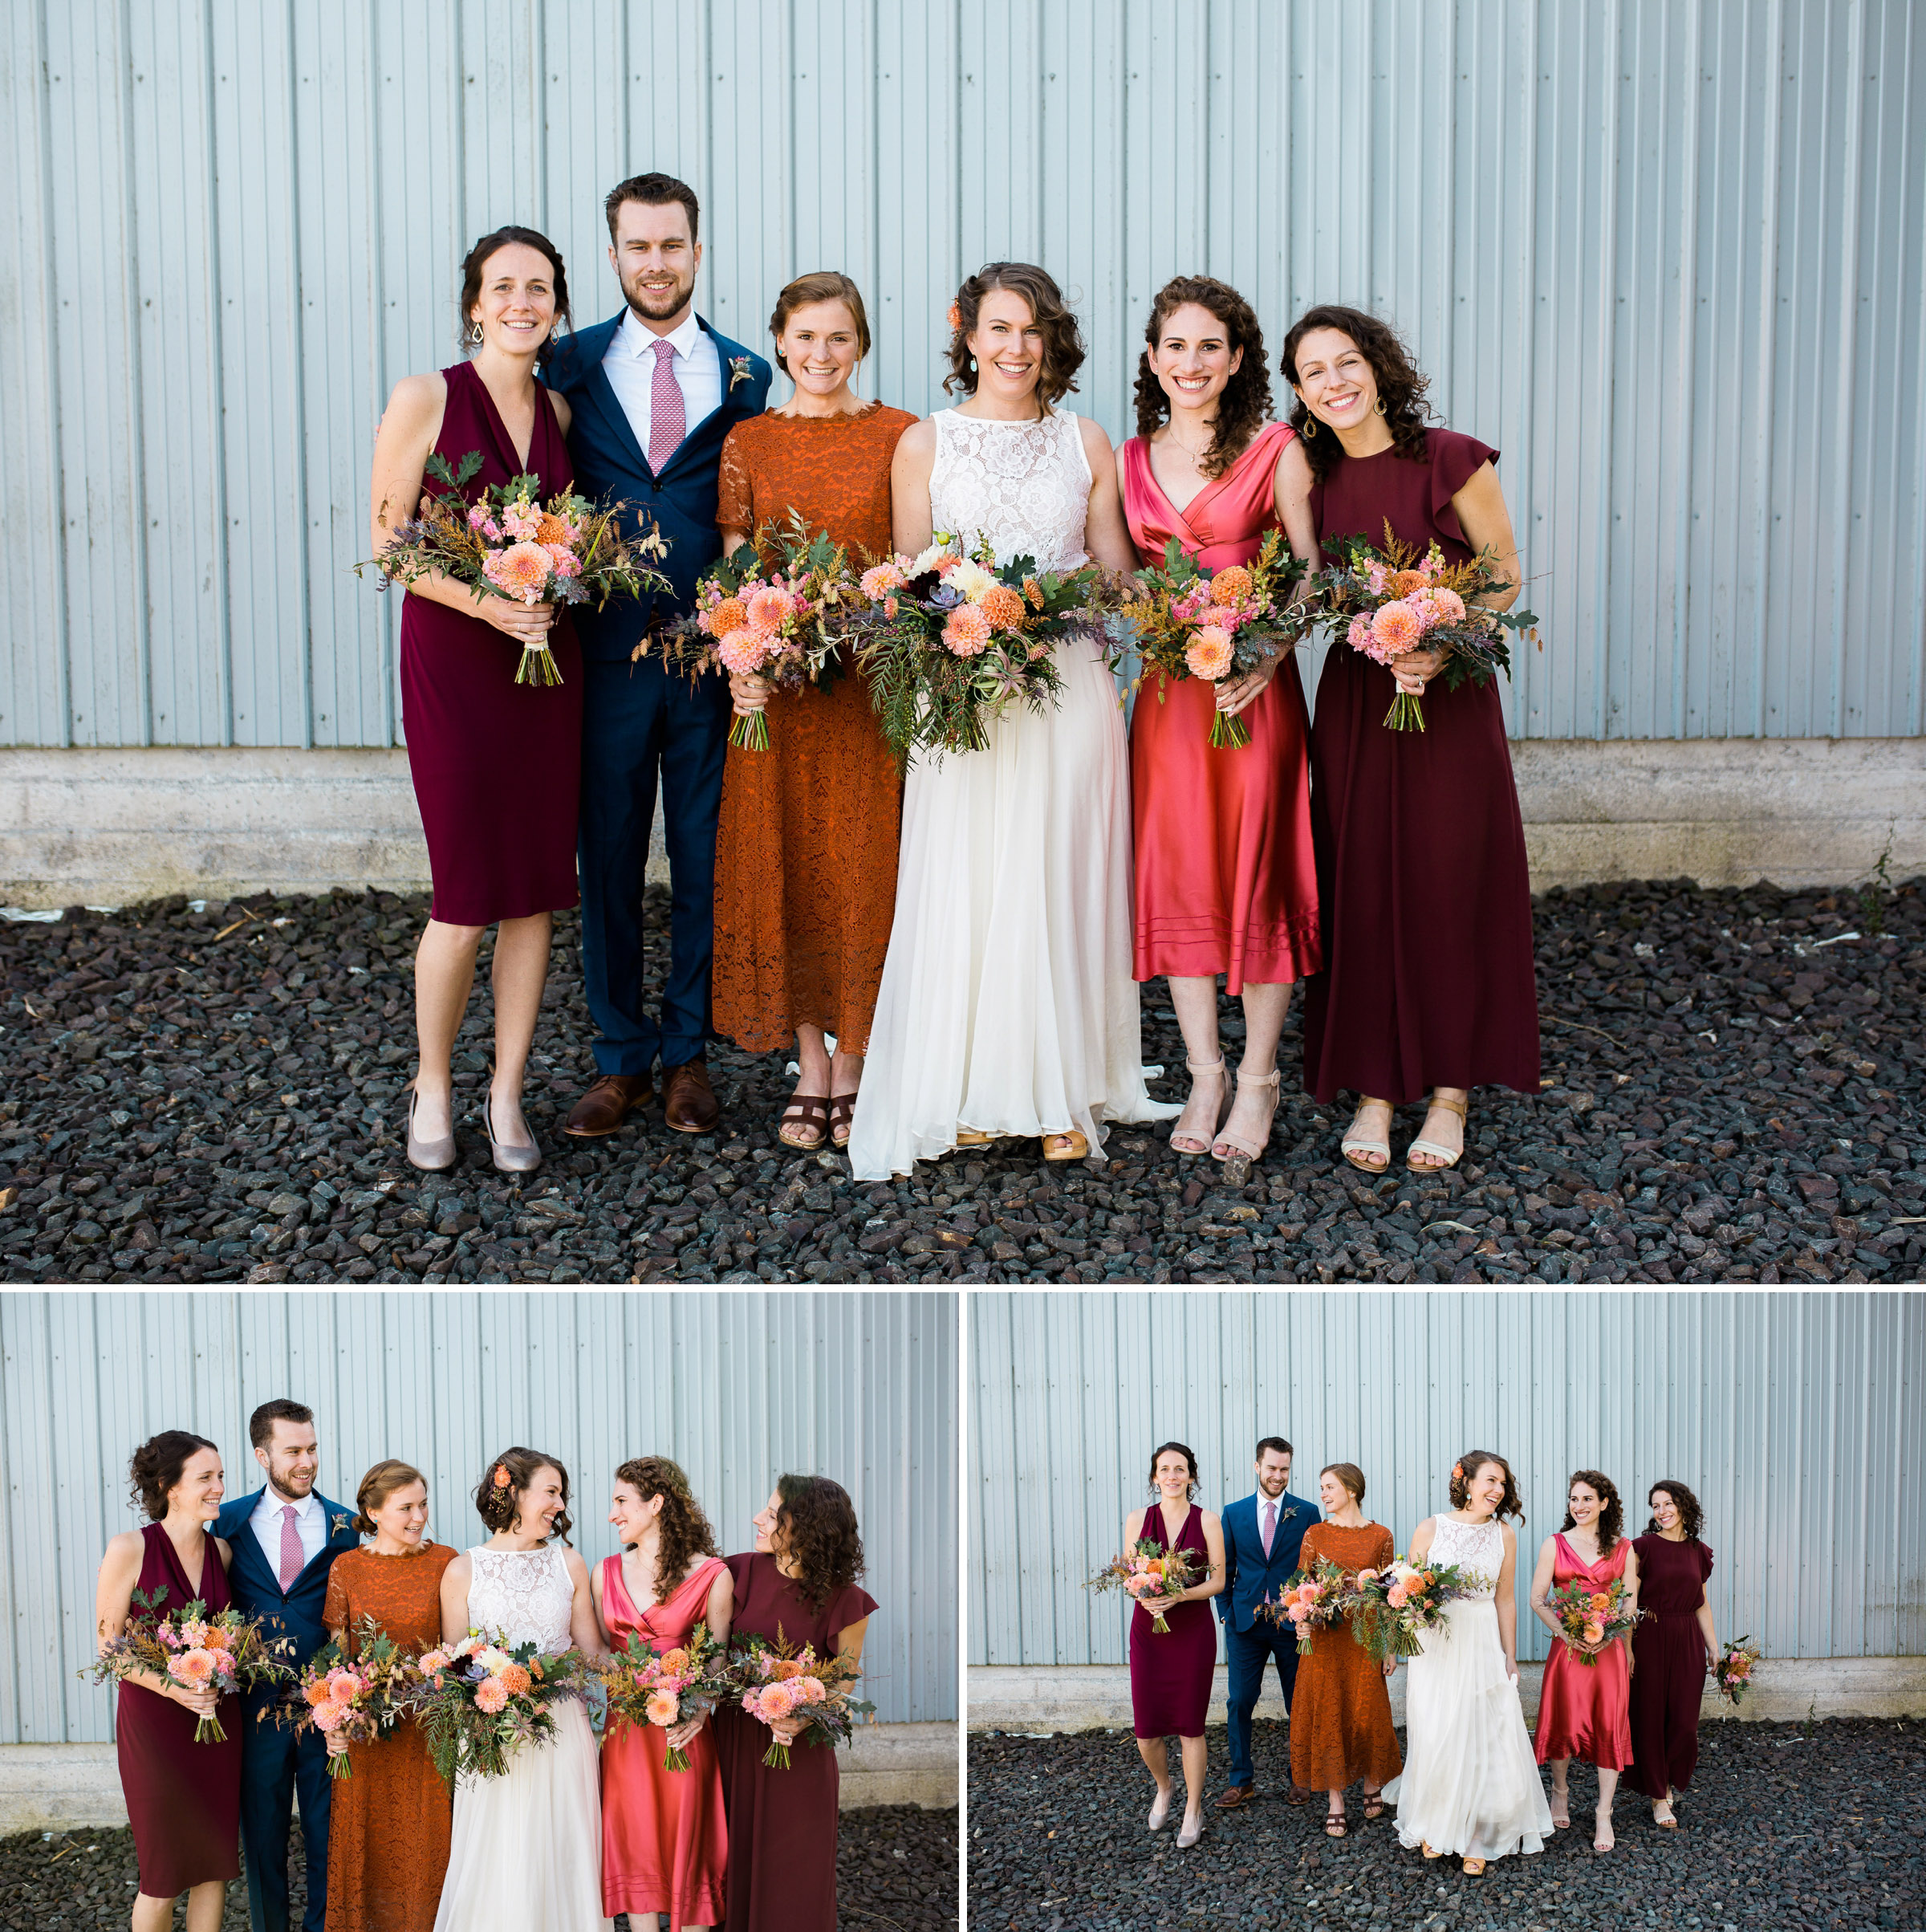 13-the-Fields-at-Willie-Greens-Wedding-Venue-Seattle-Photographer-bride-groom-bridesmaids-groomsmen-portraits-Photography